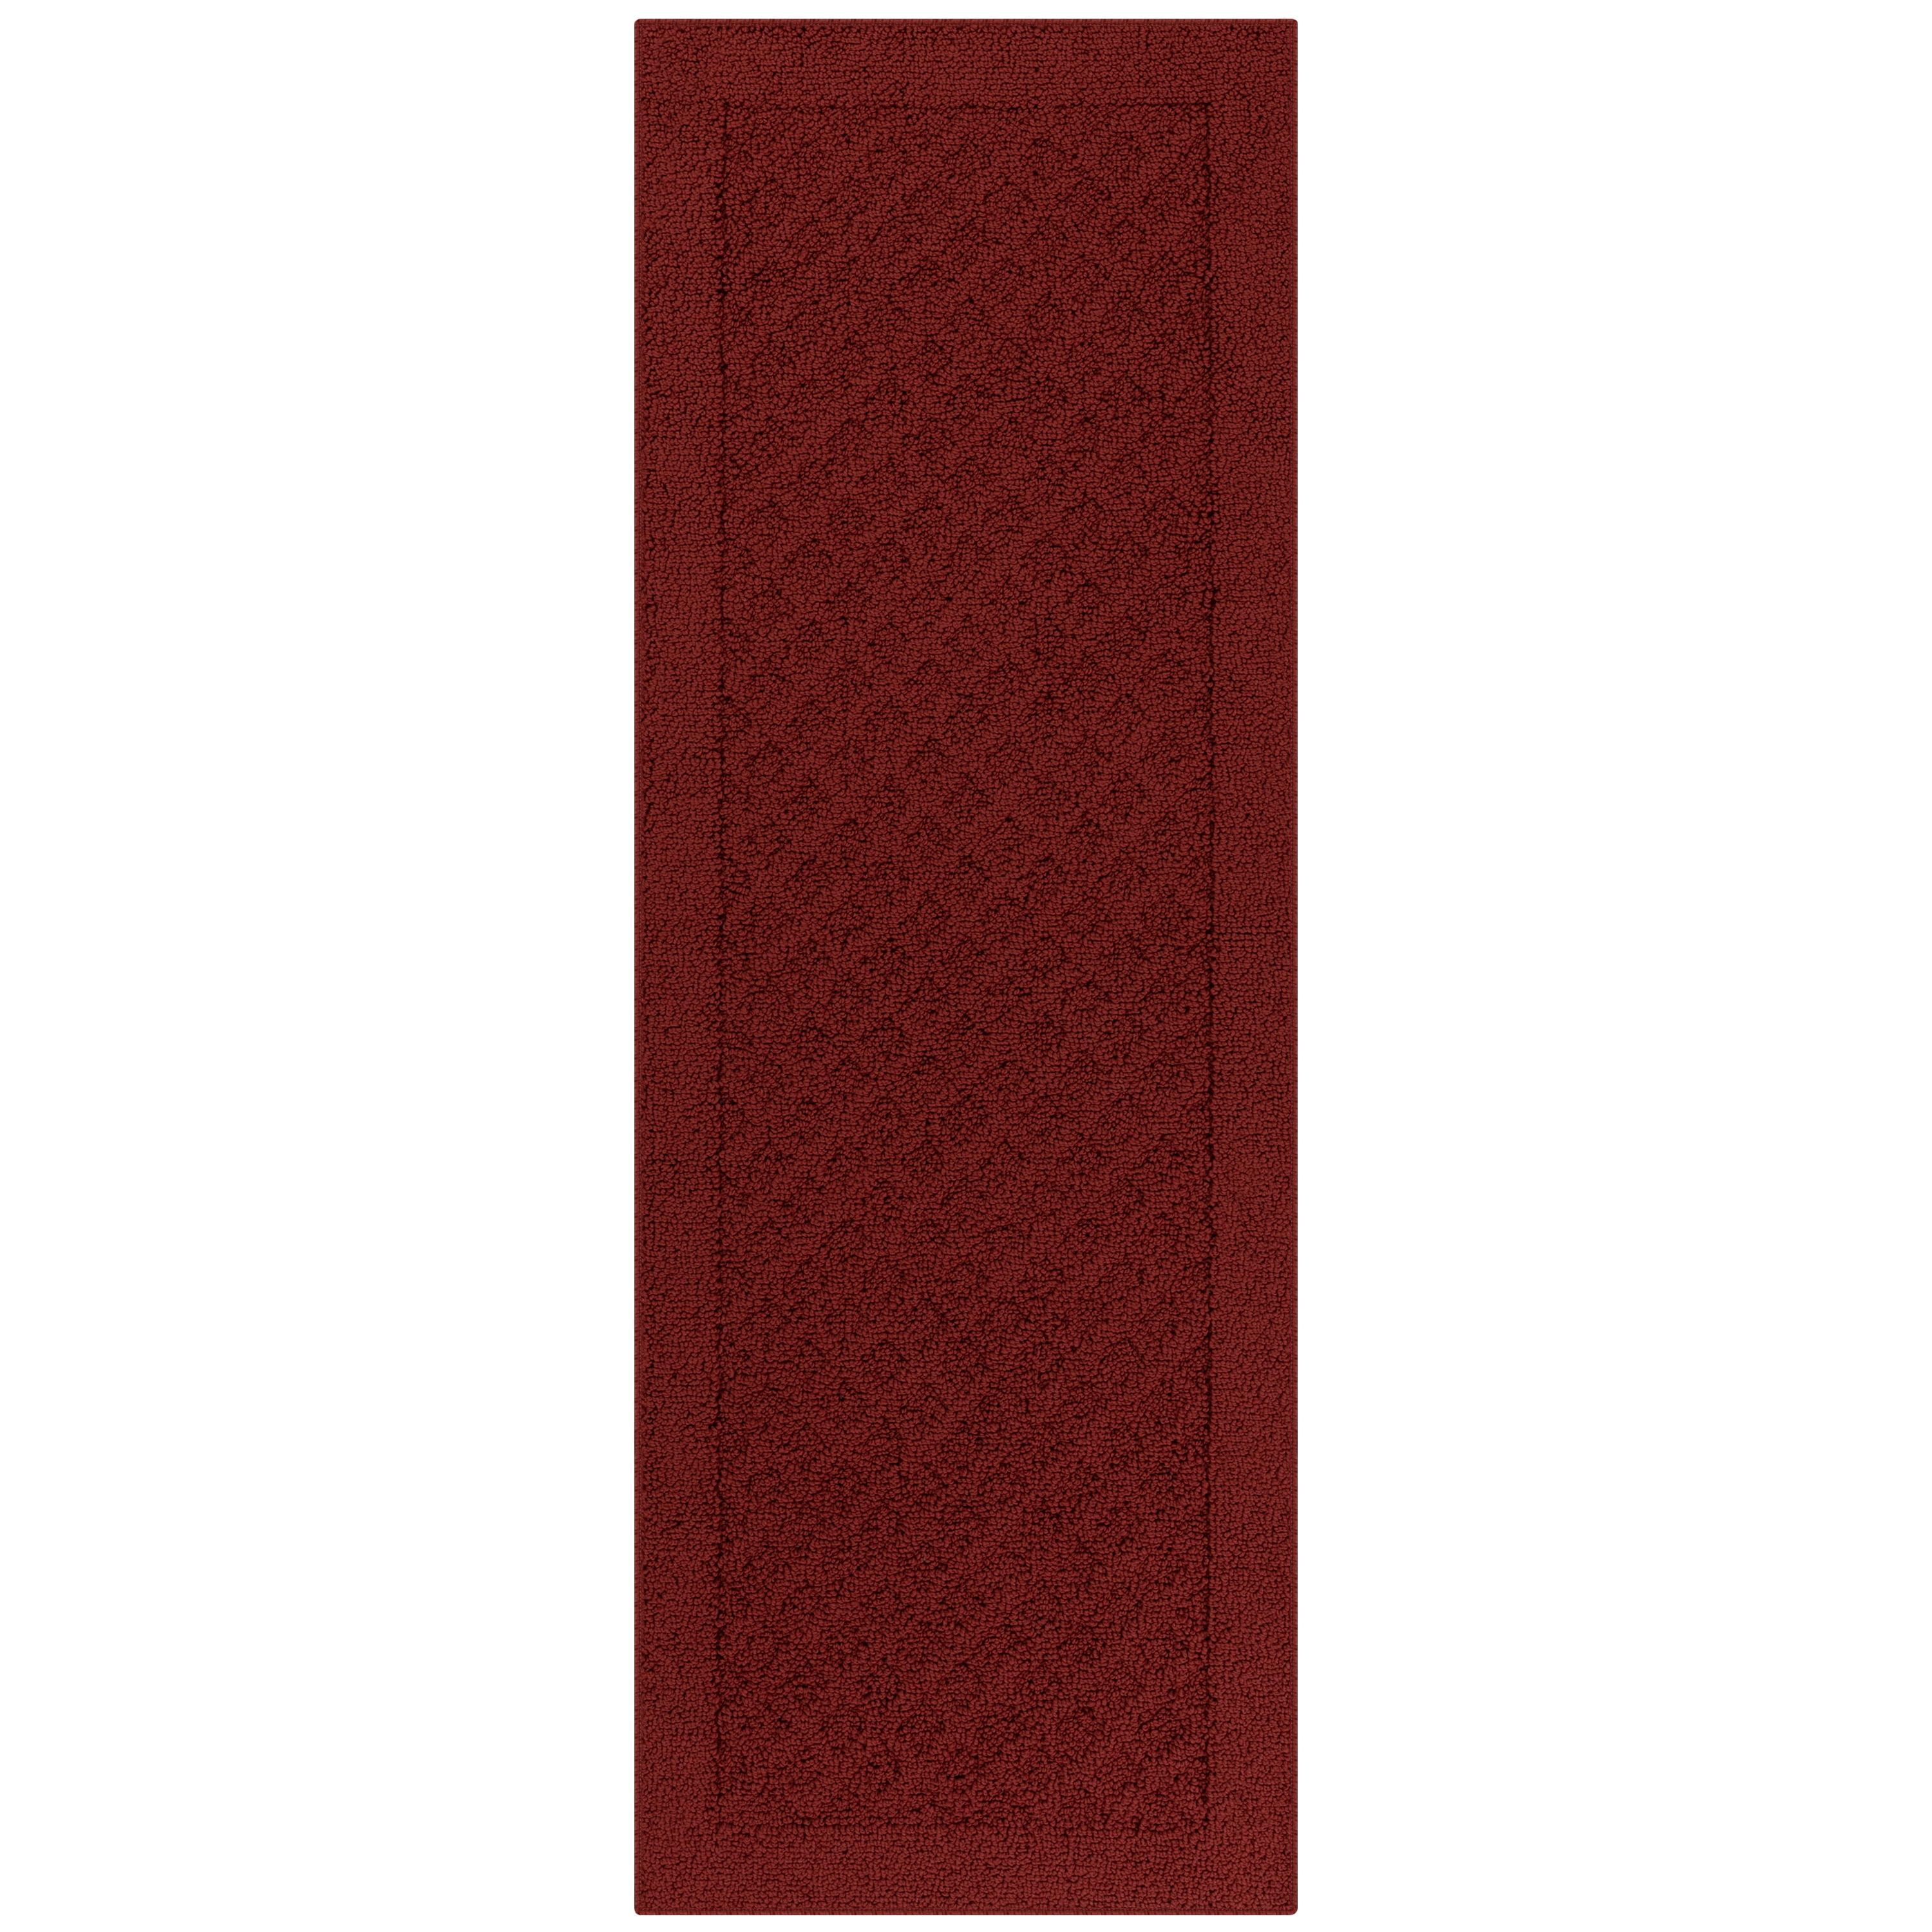 Mainstays Dylan Solid Diamond Traditional Cinnamon Red Runner Rug, 1'9"x5'